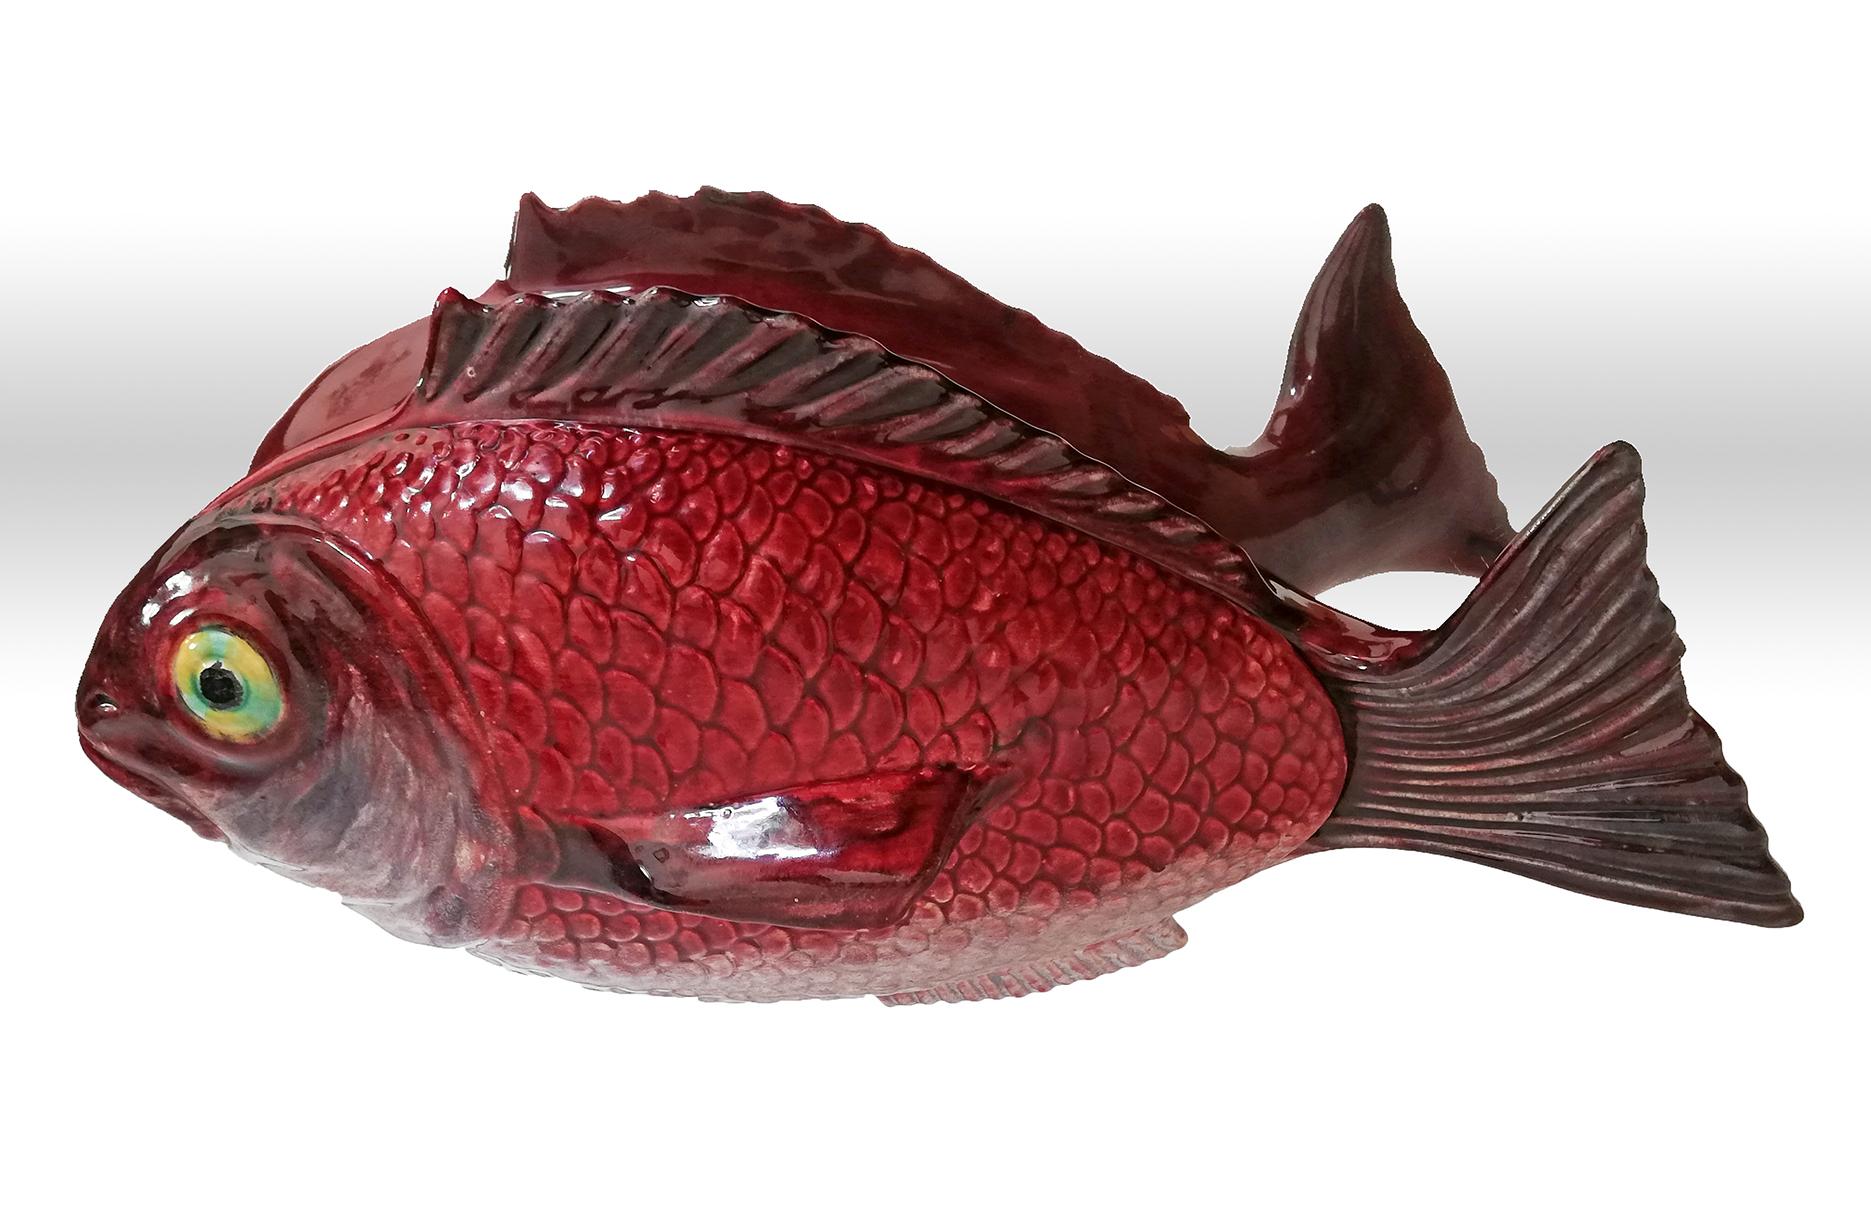 Portuguese Large Midcentury Majolica Red Fish Pottery Ceramic Tureen Box, Portugal, 1950s For Sale